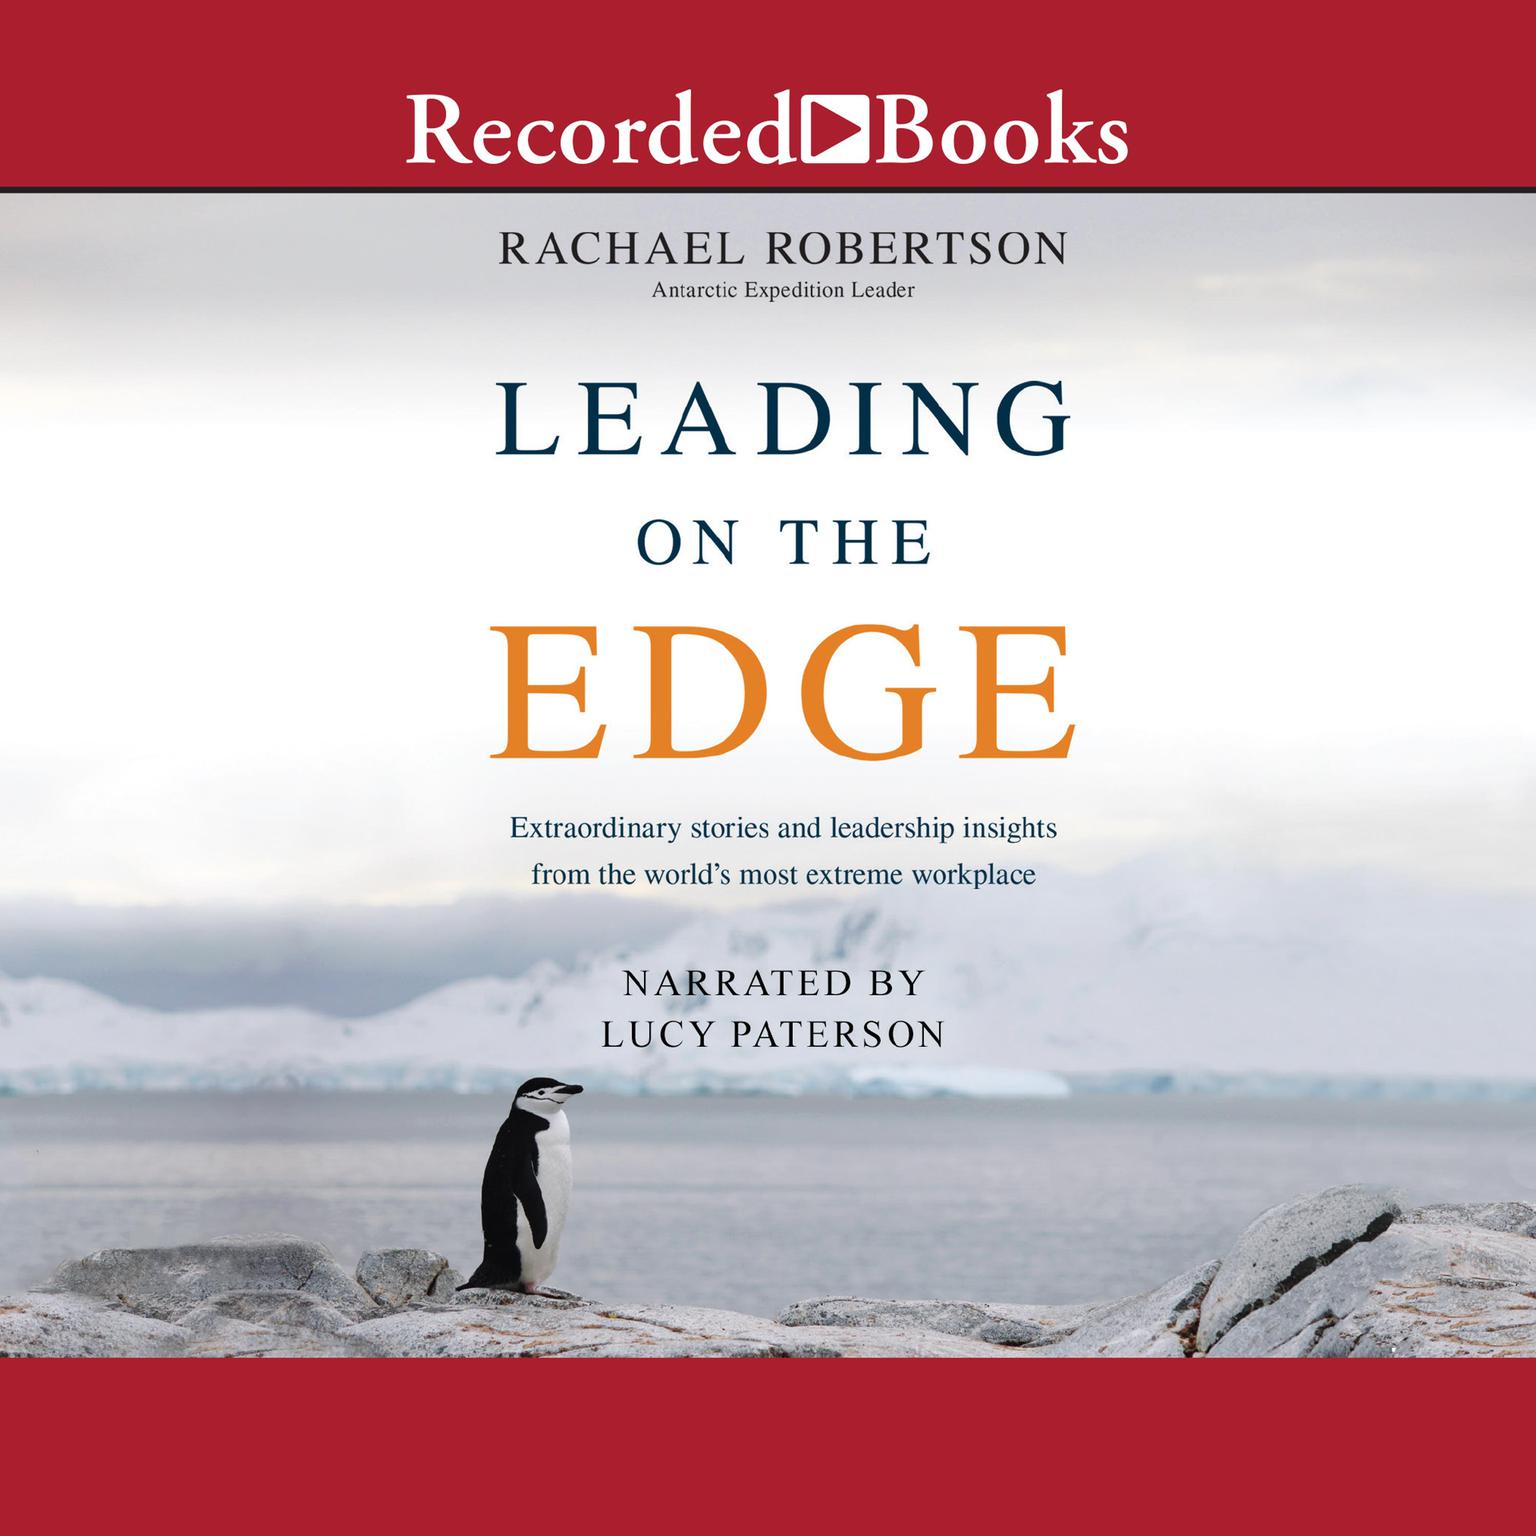 Leading on the Edge: Extraordinary Stories and Leadership Insights from the Worlds Most Extreme Workplace Audiobook, by Rachael Robertson